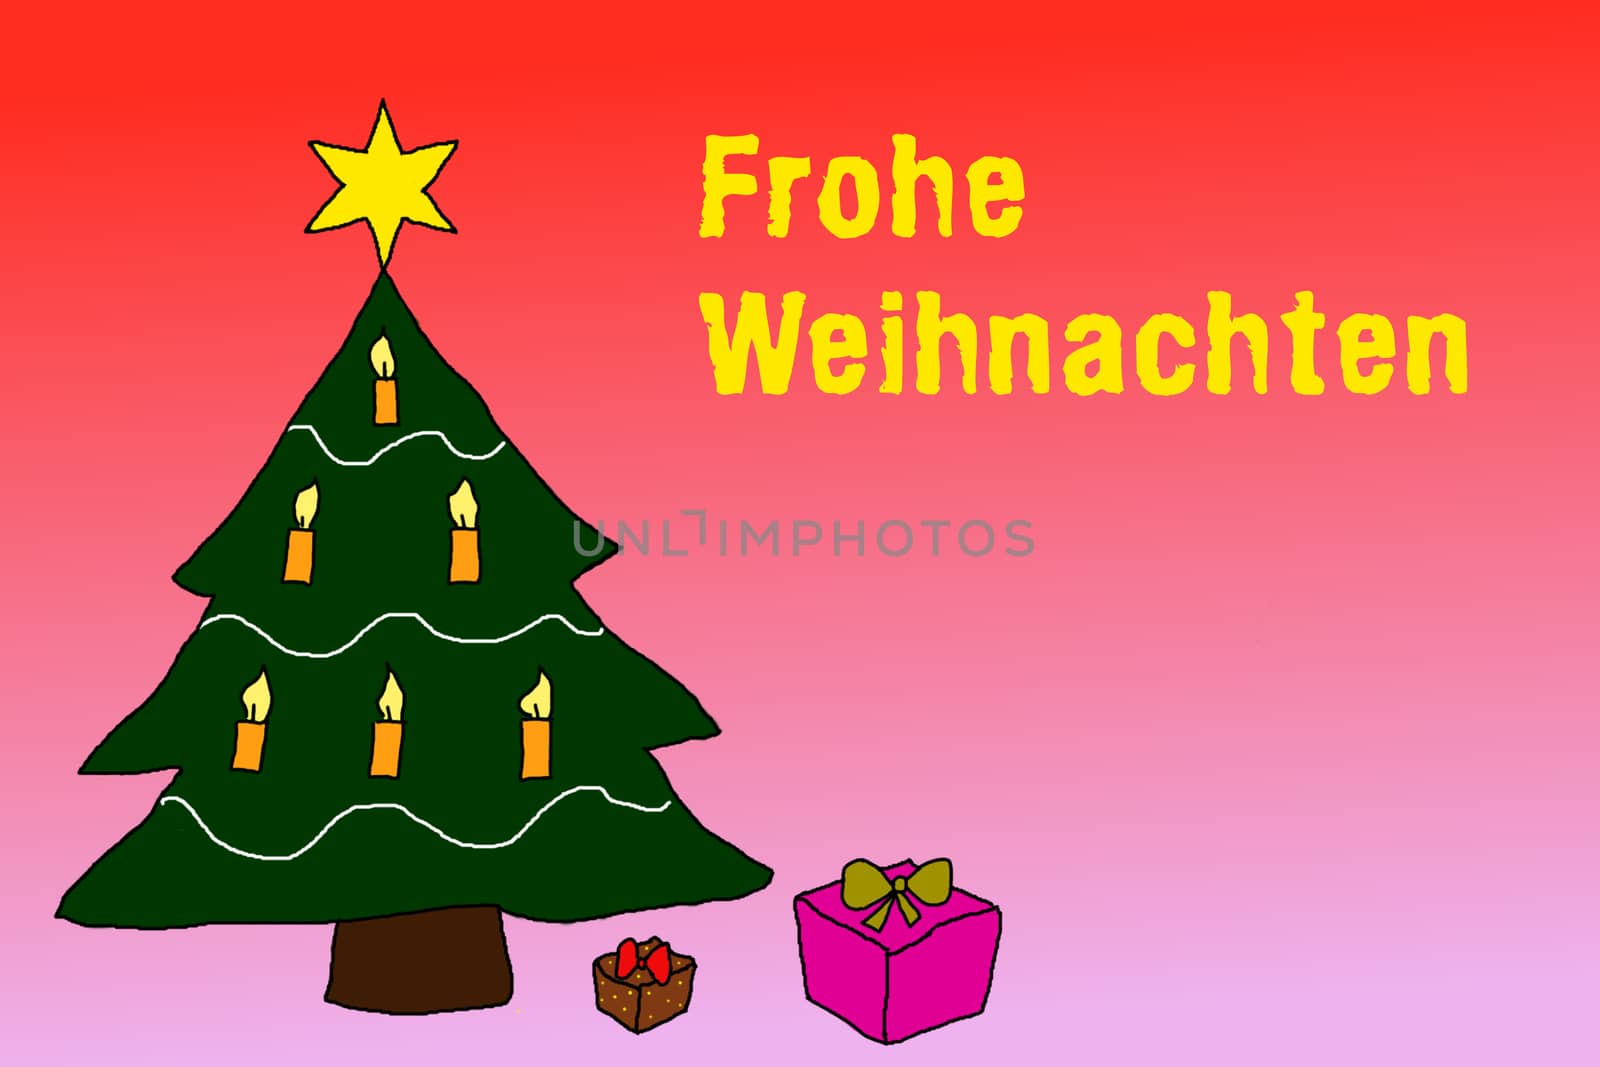 Illustration: Wishing Merry Christmas in german language by gwolters